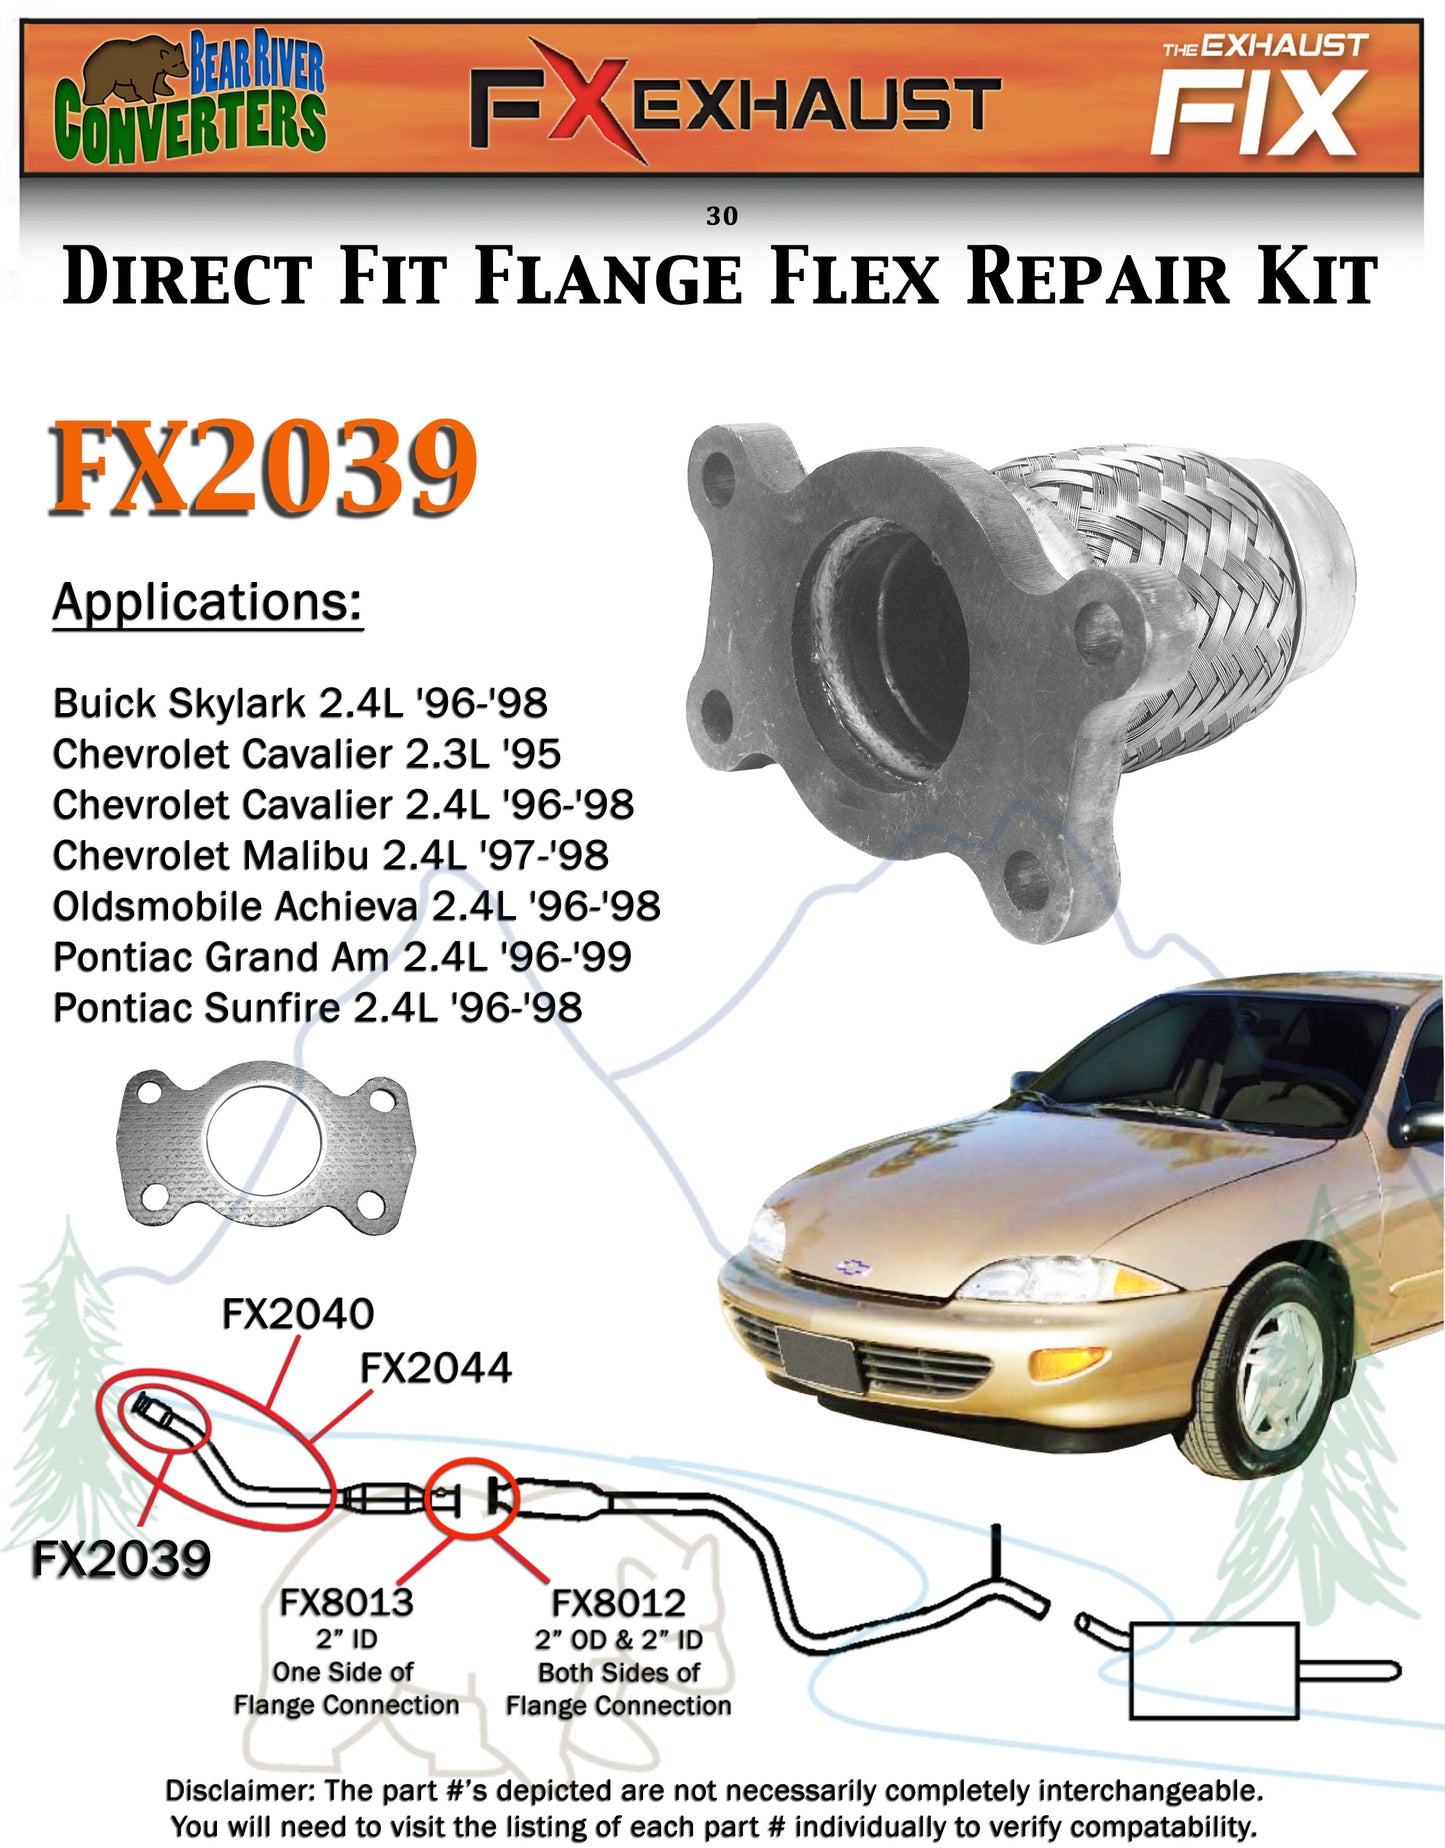 FX2039 Semi Direct Fit Exhaust Flange Repair Flex Pipe Replacement Kit With Gasket